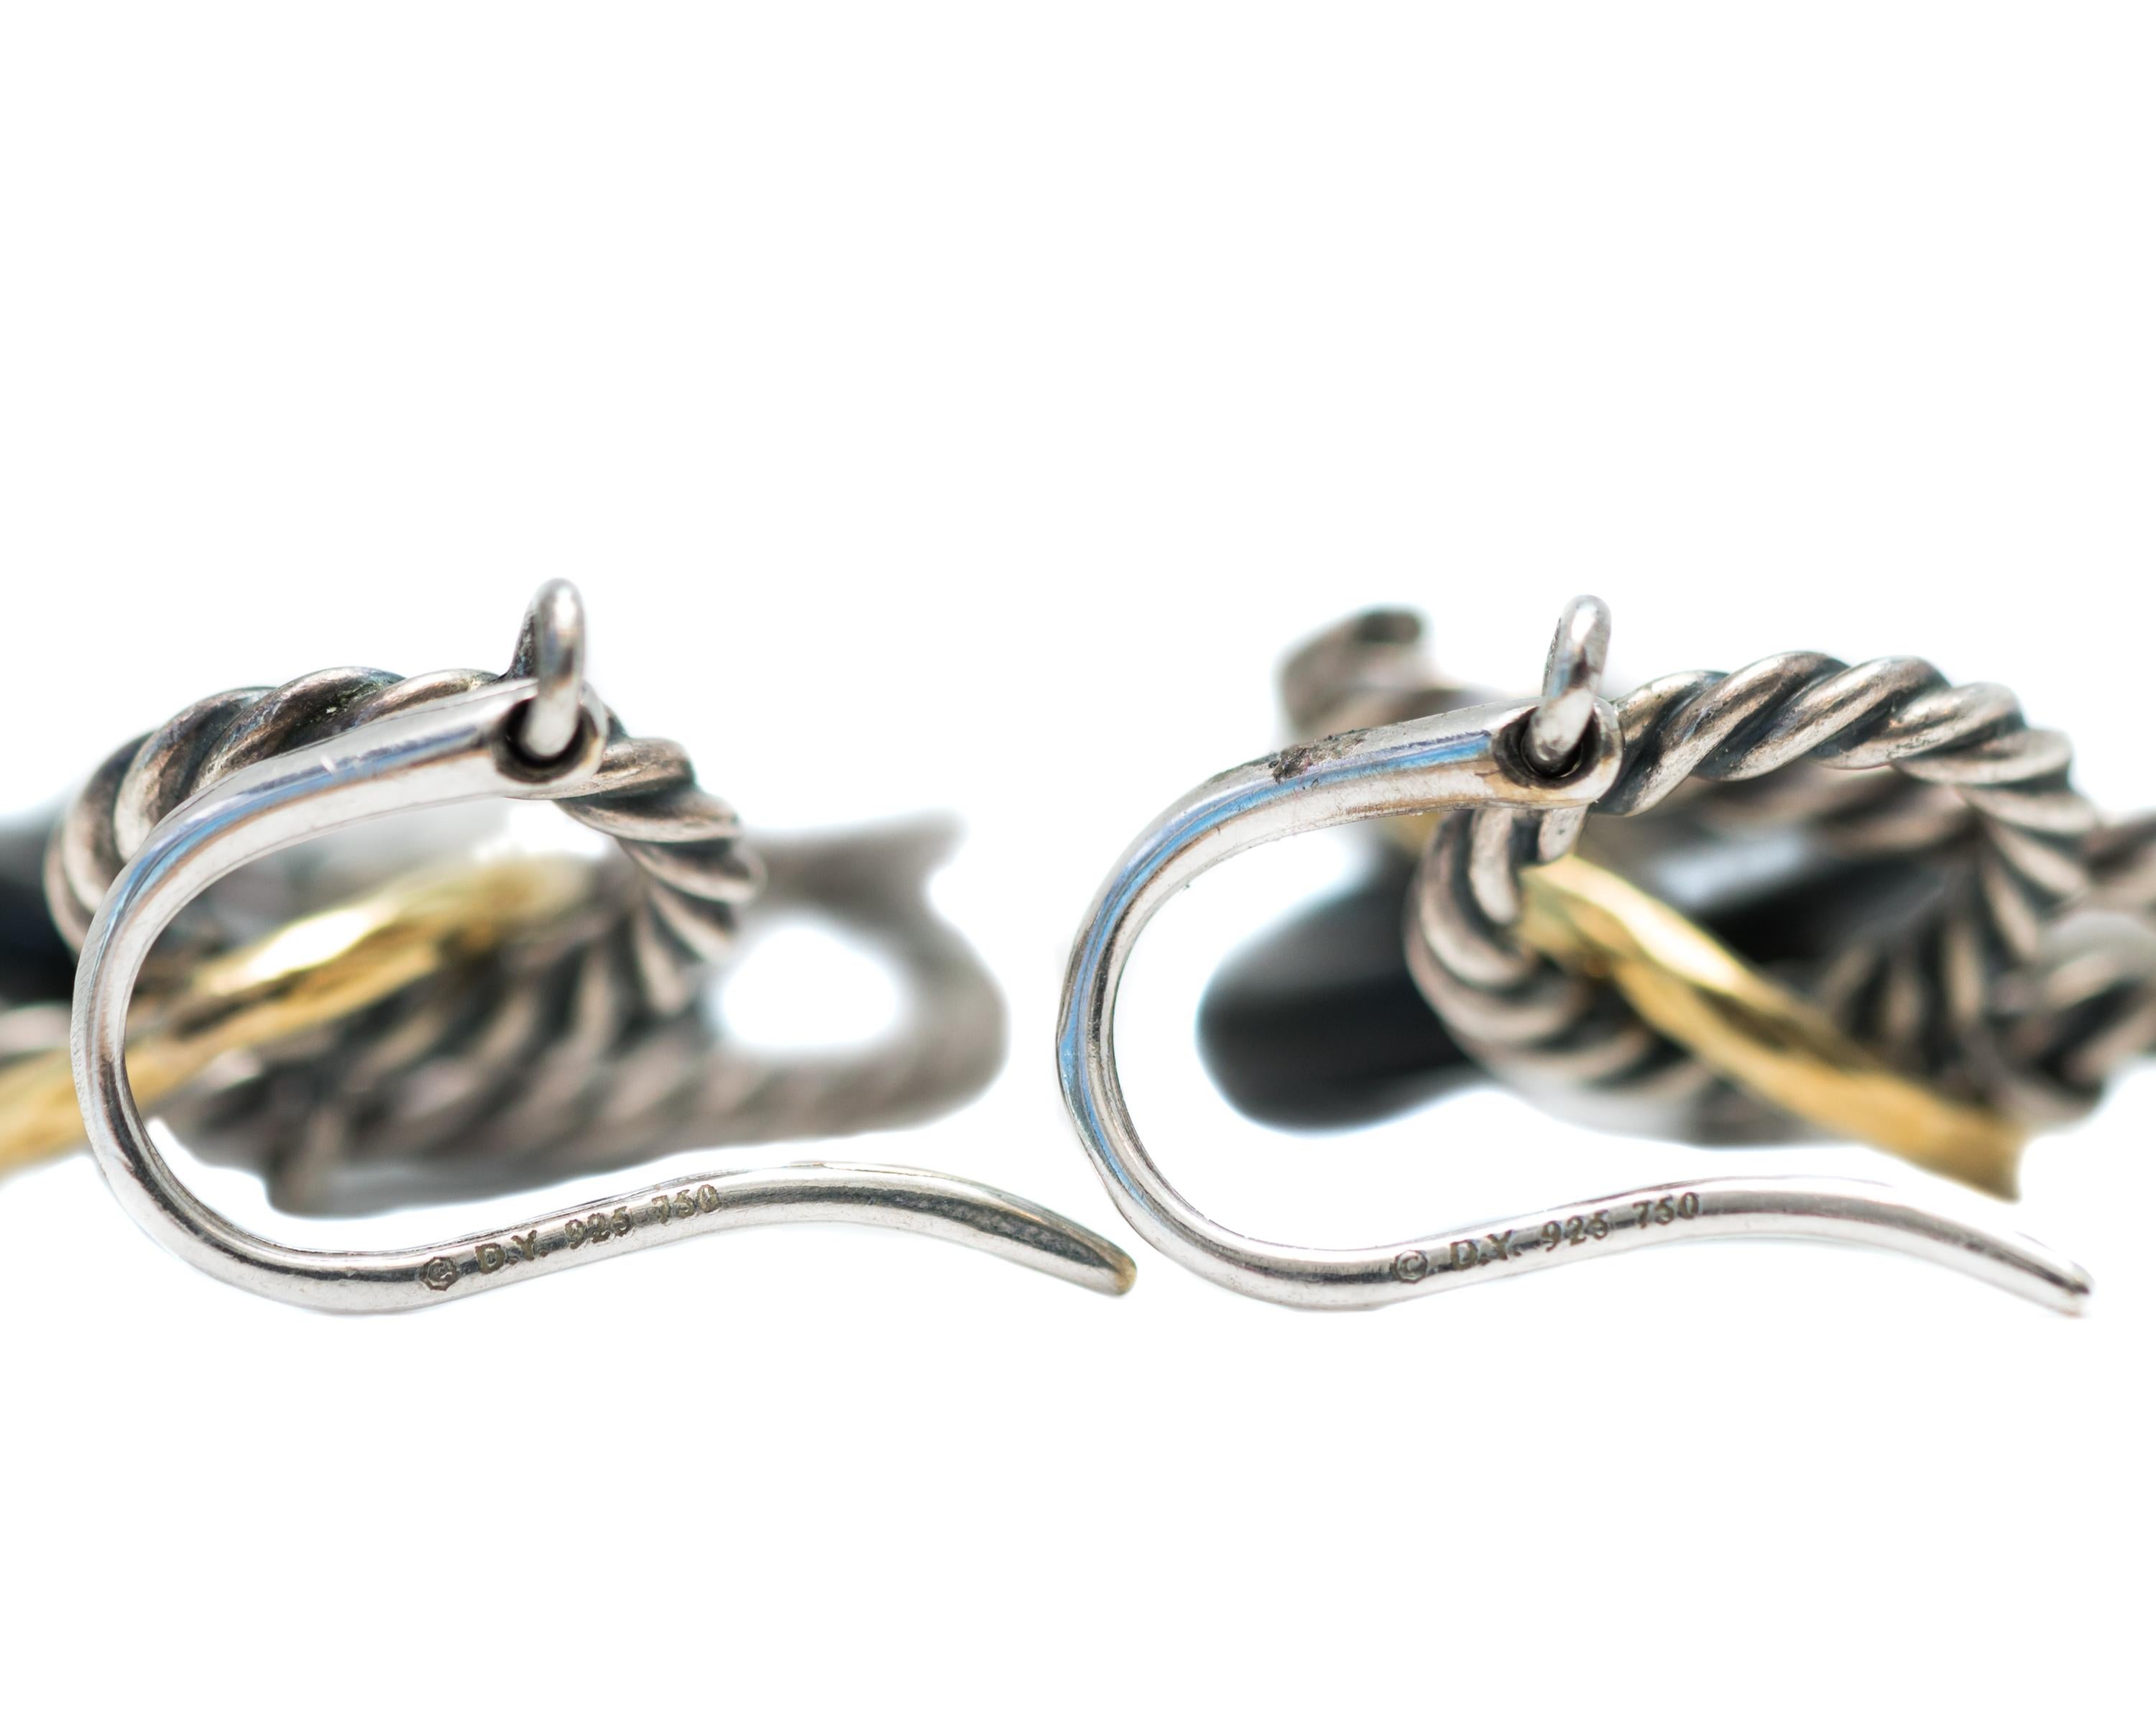 David Yurman Link Earrings - Sterling Silver, 18 Karat Yellow Gold, Onyx

Feature:
Sterling Silver Cable Links
18 Karat Yellow Gold Textured Links
Onyx Smooth Links
Sterling Silver Earring Hooks

Earrings measure 2 1/4 inches long
Widest link is 3/4